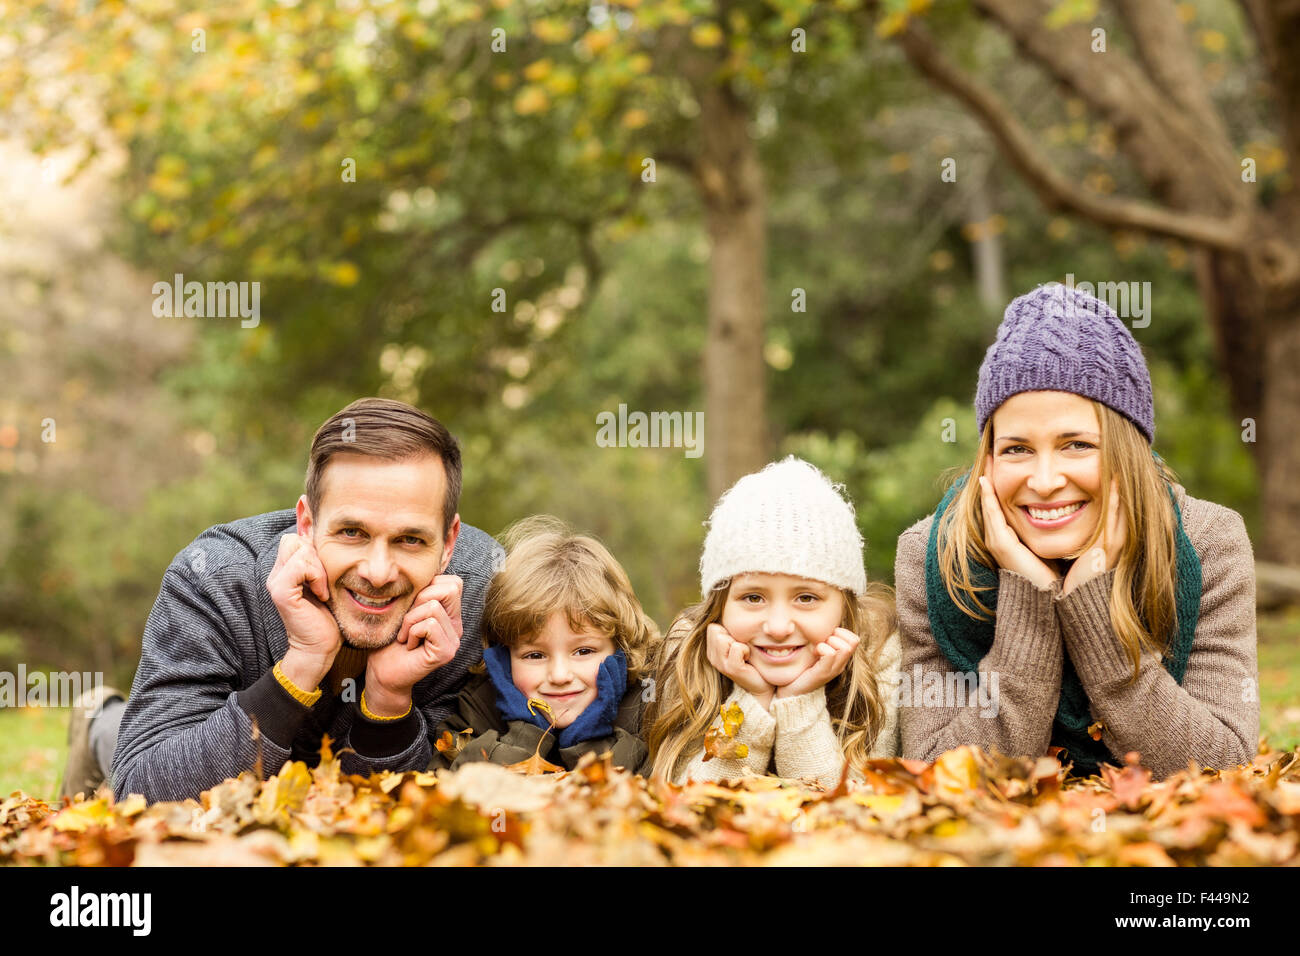 Smiling young family with hands on cheeks Stock Photo